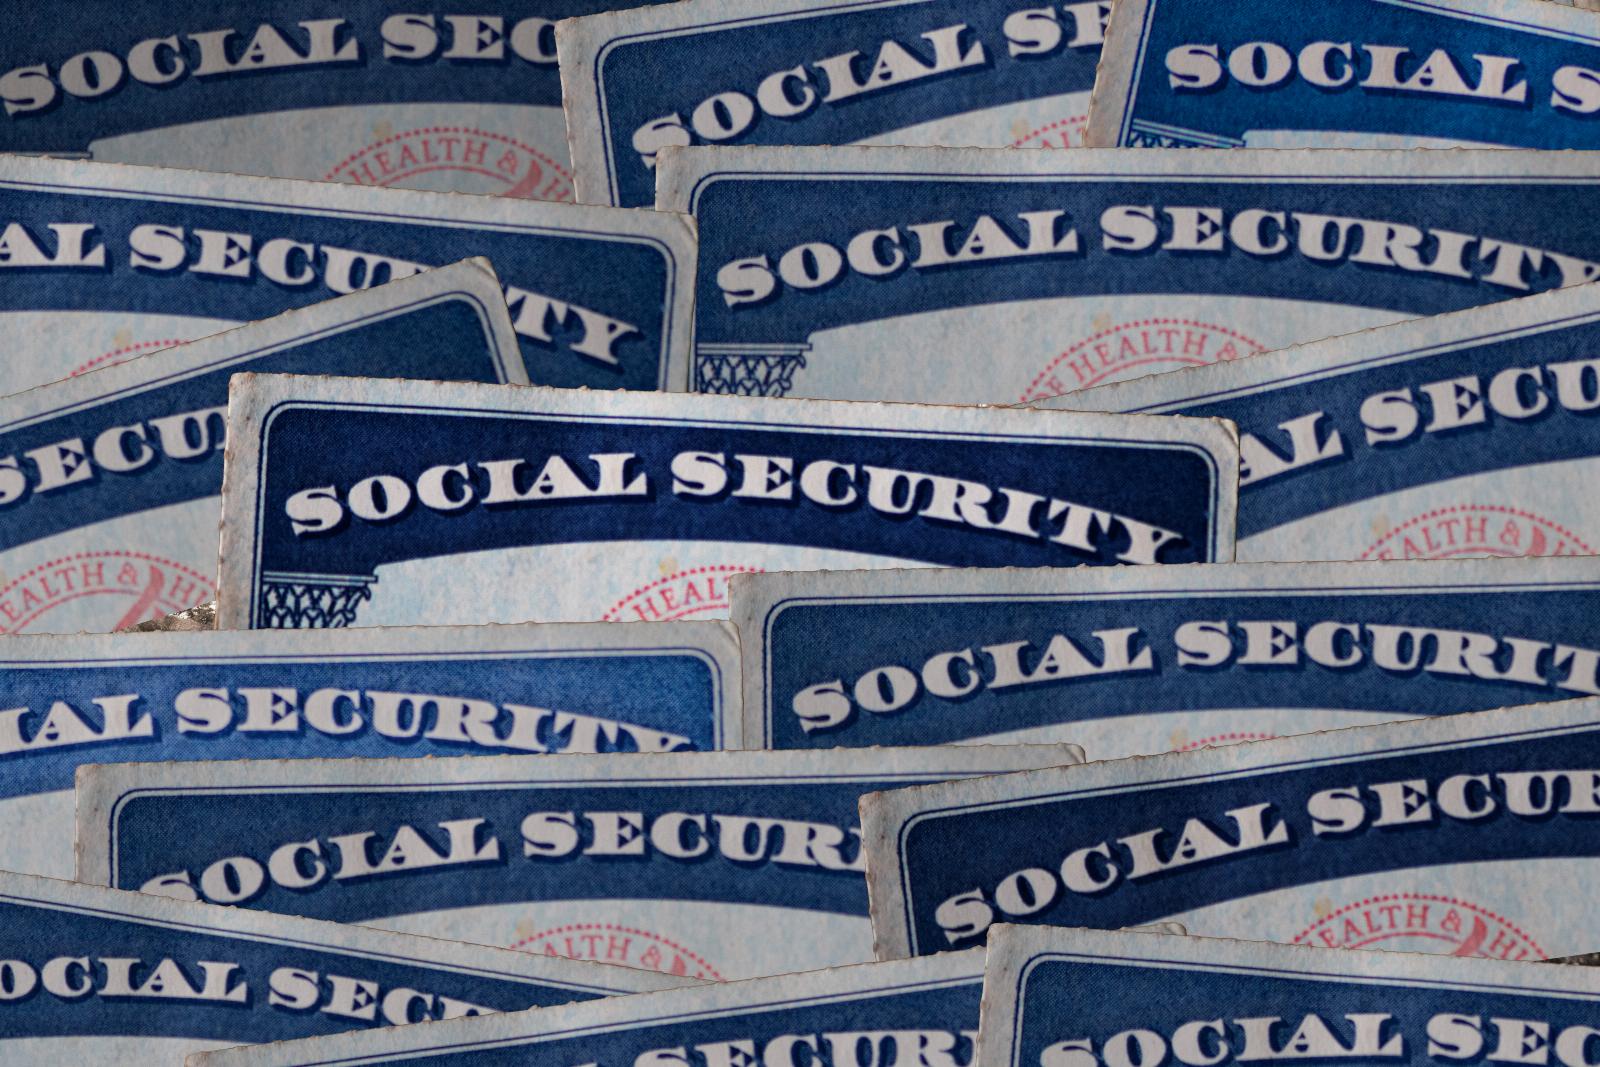 Hackers stole 340,000 Social Security numbers from government consulting firm